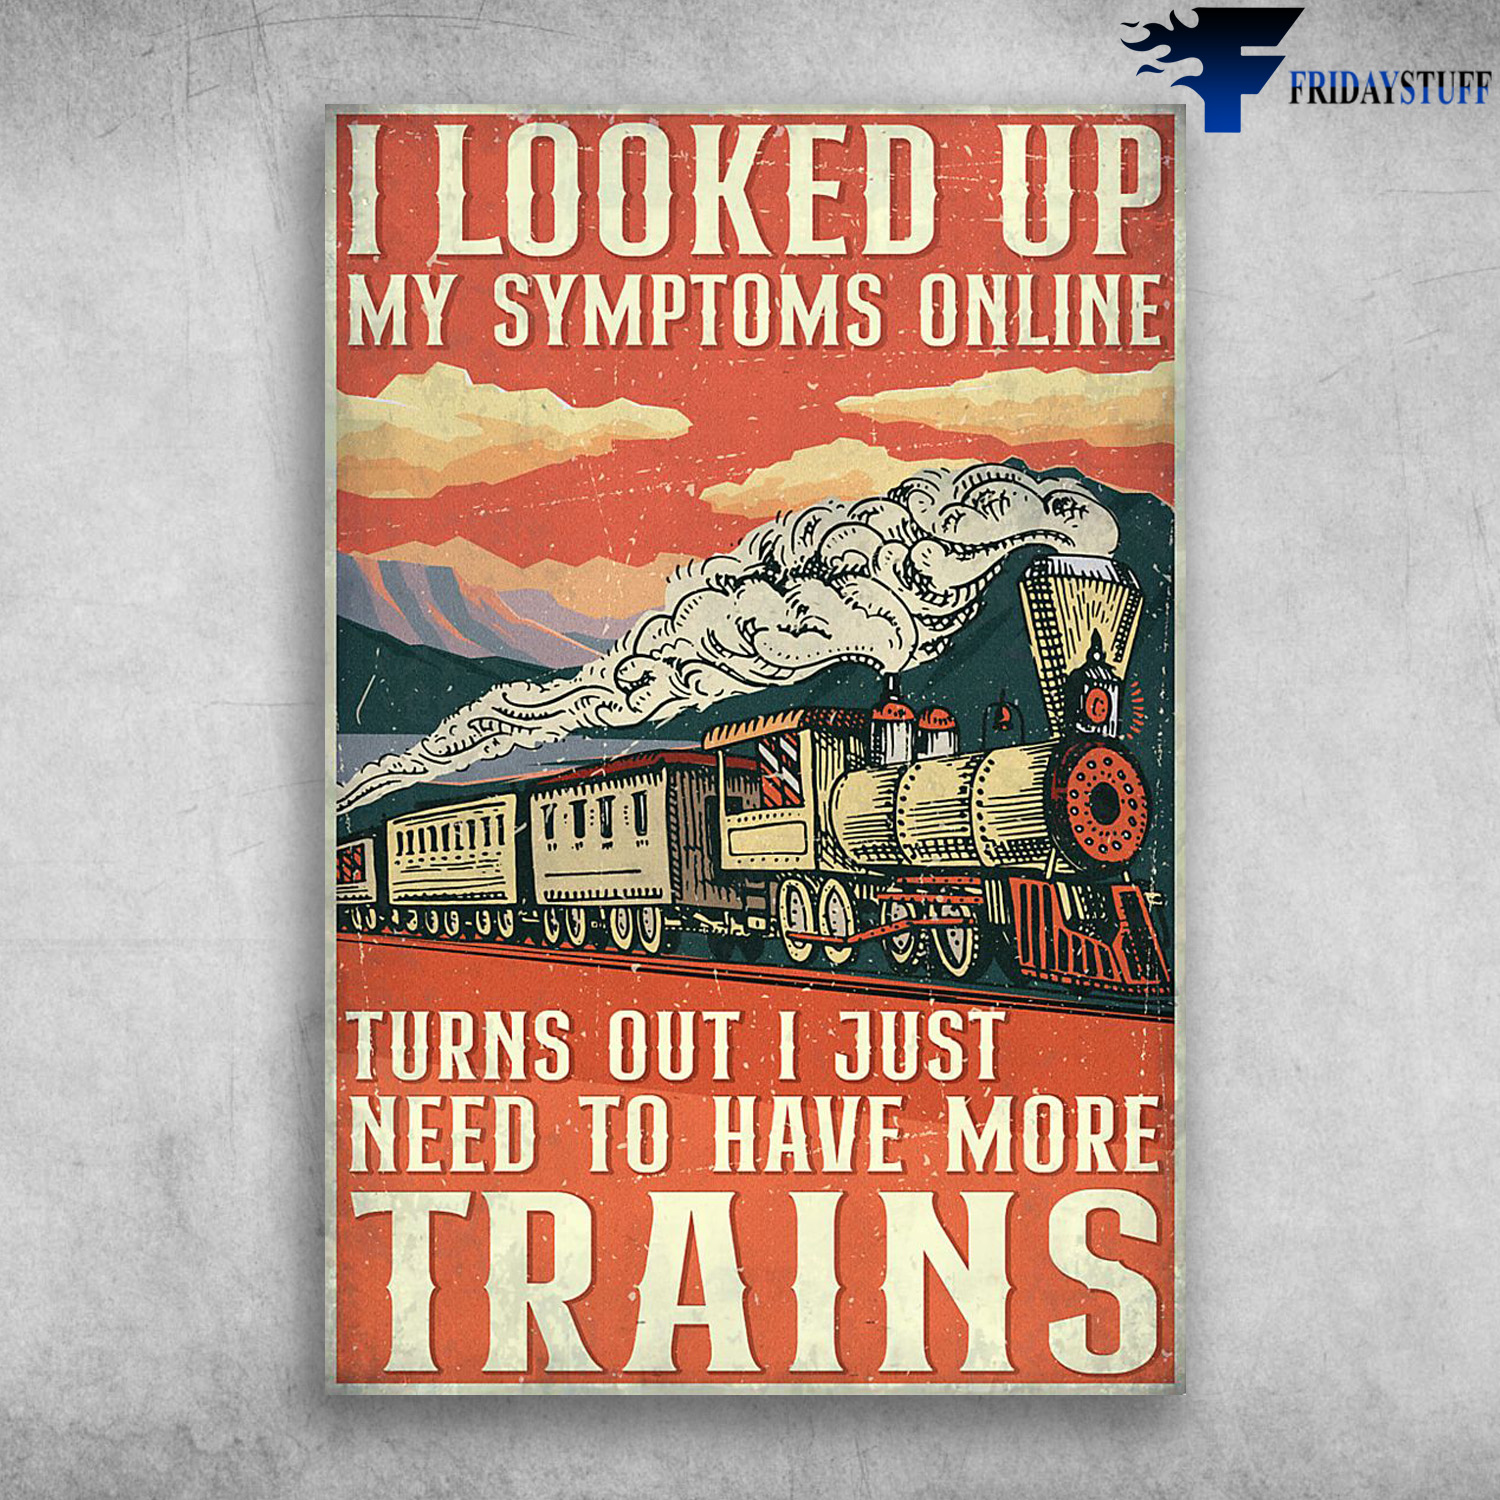 Model Railroad - Looked Up Symptoms Online, Turns Out I Just Need To Have More Trains